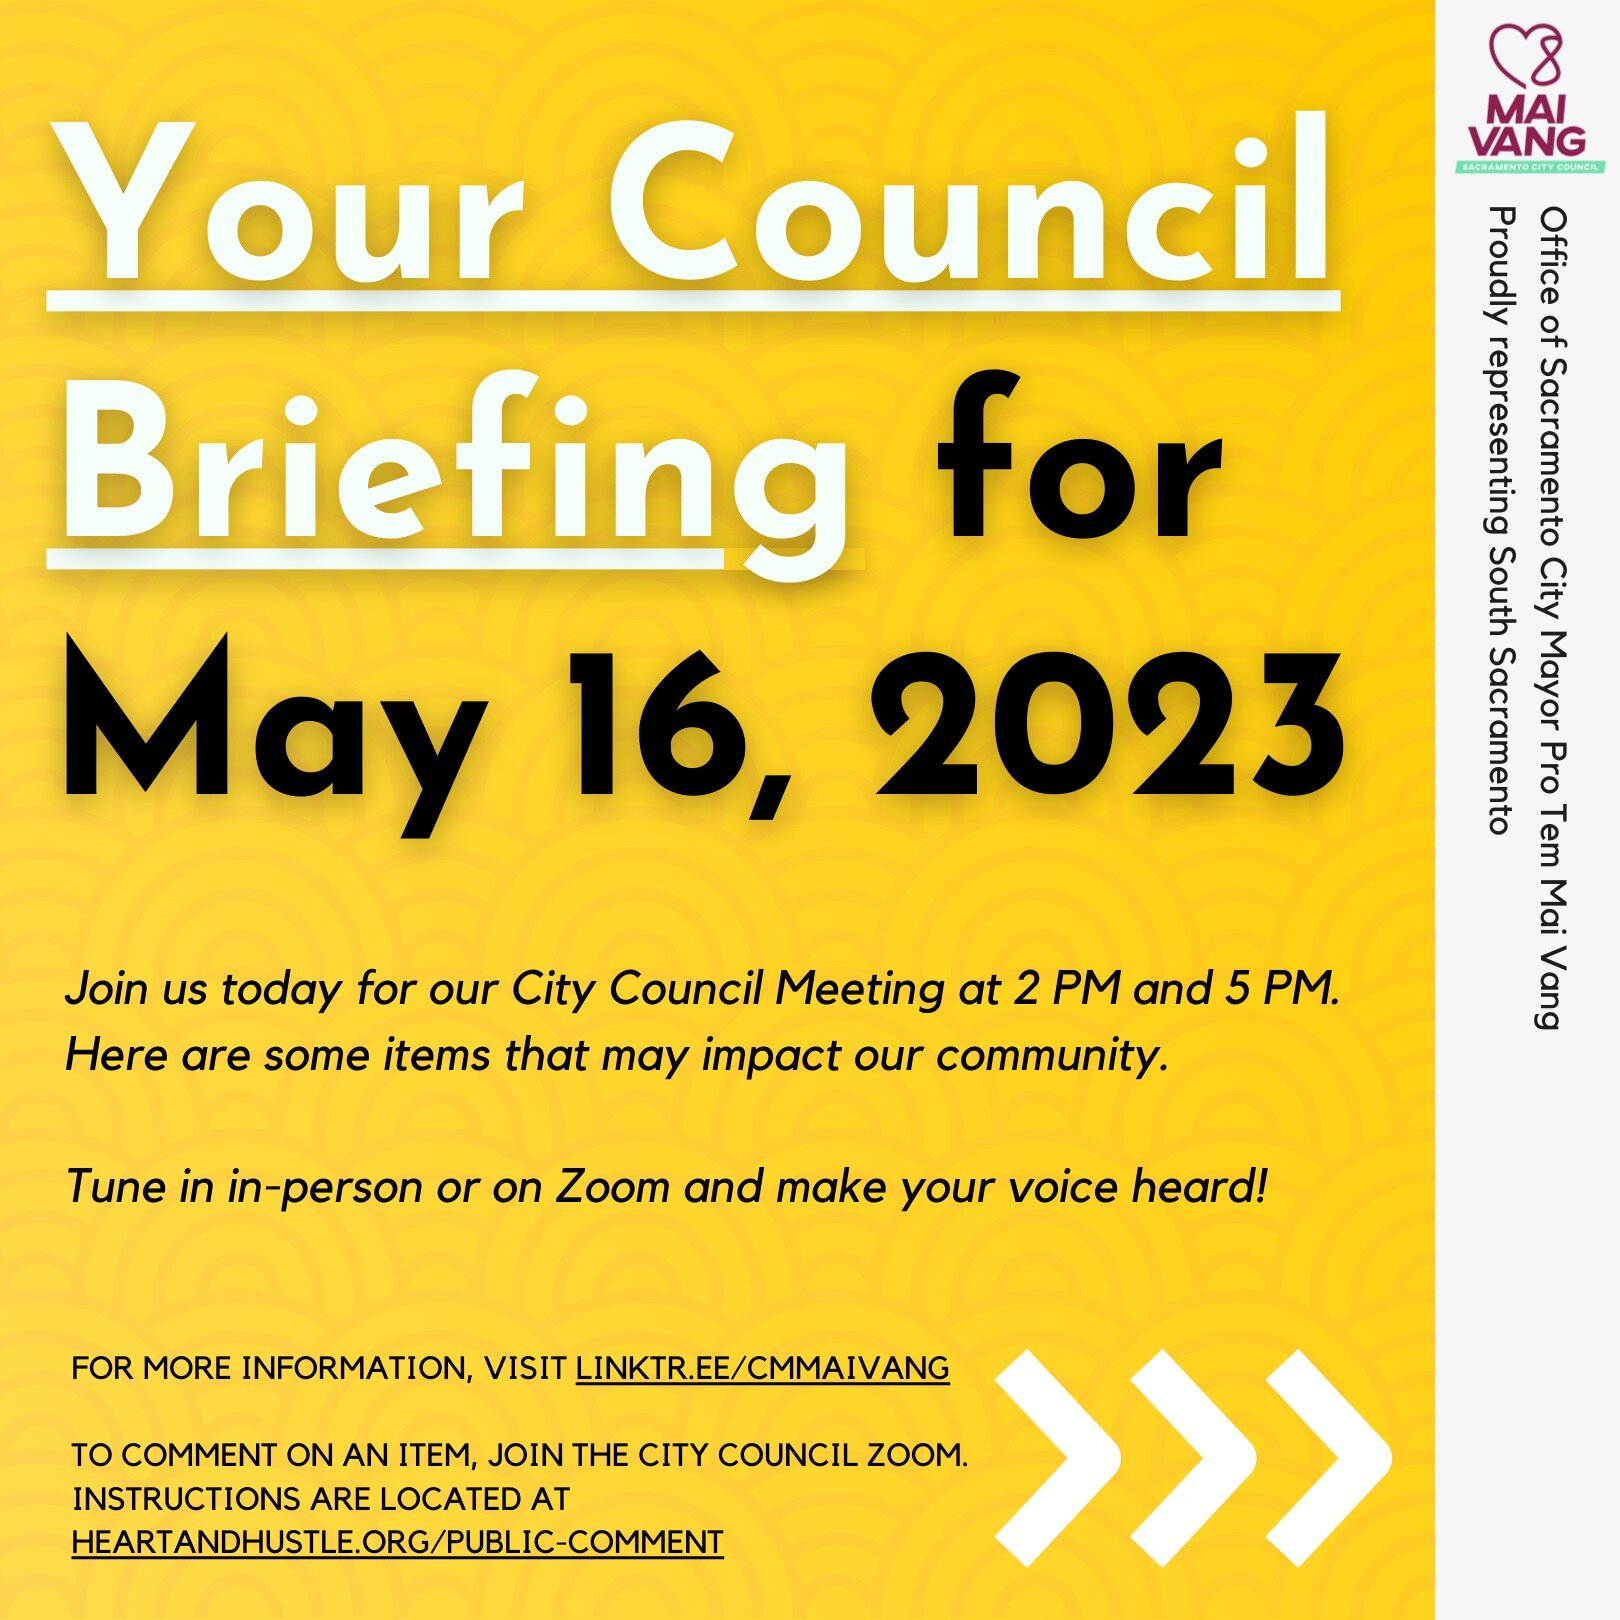 📢 Don't miss the opportunity to stay informed and engaged as we discuss crucial matters that could shape our community's future. Join us today for our City Council Meeting at 2 PM and 5 PM!

📝 Here are a few key items on the agenda that could have 